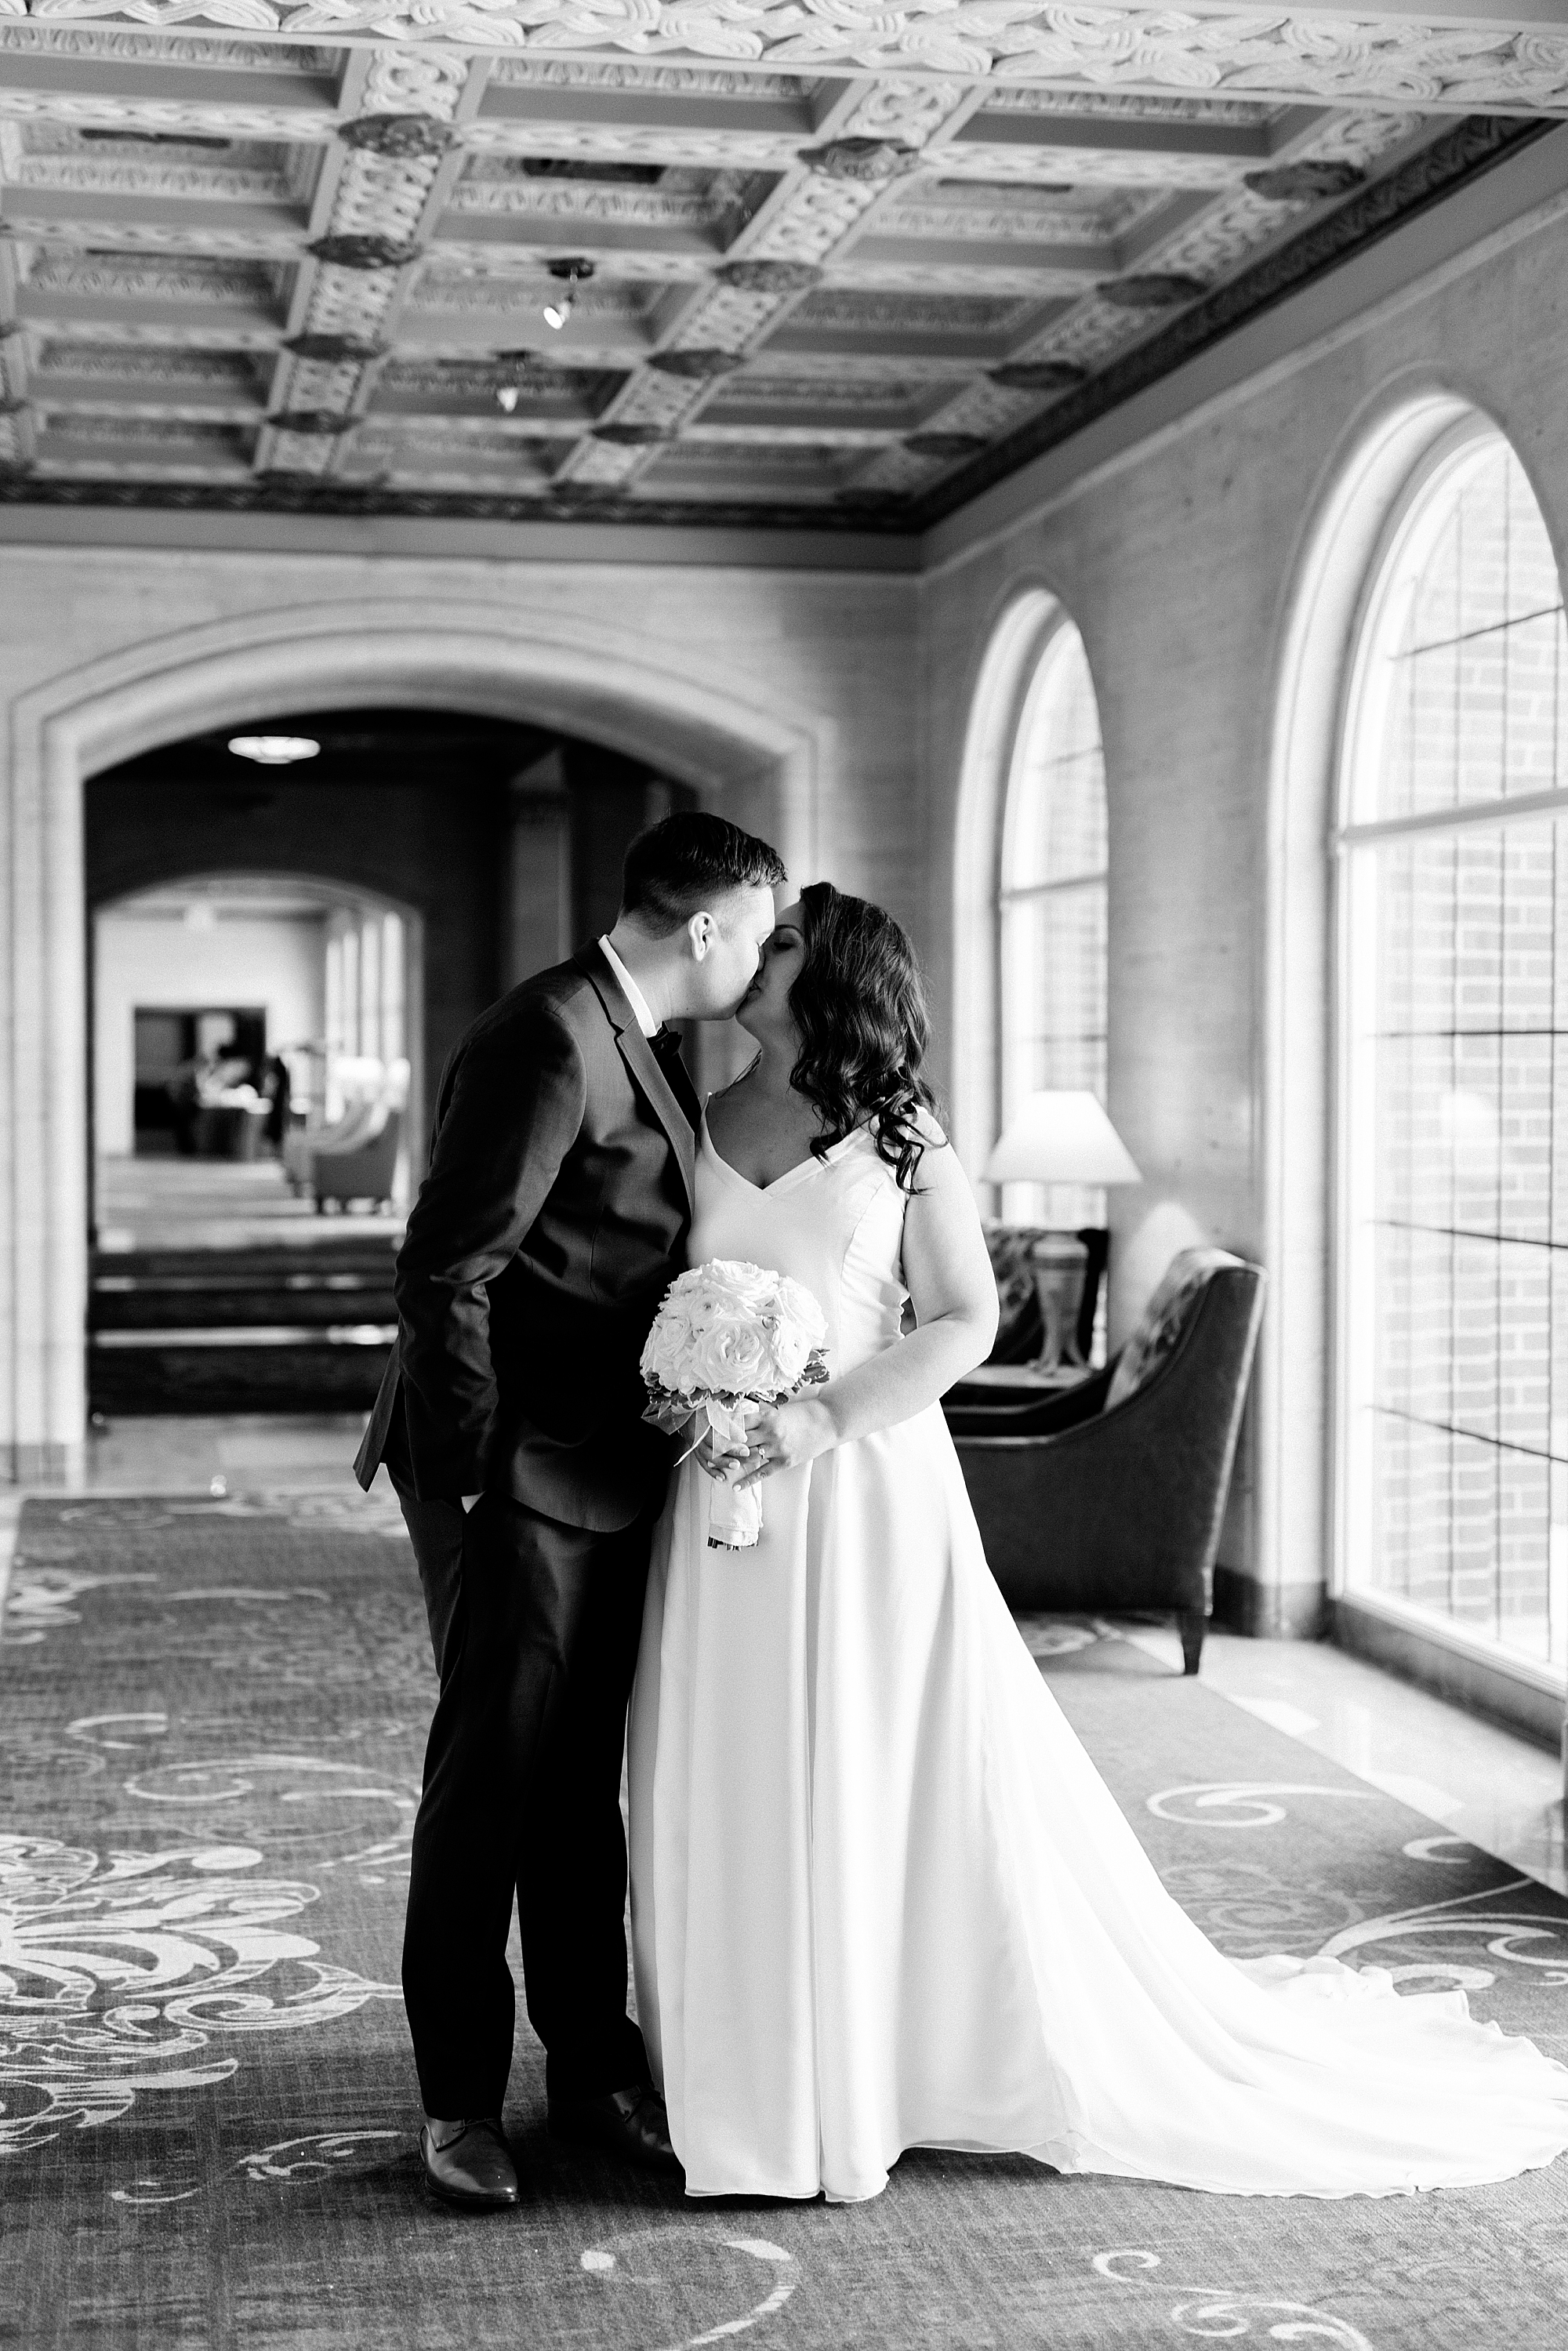 A classic blush and navy winter Inn at St. John's wedding set against a snowy backdrop in Plymouth, Michigan by Breanne Rochelle Photography.